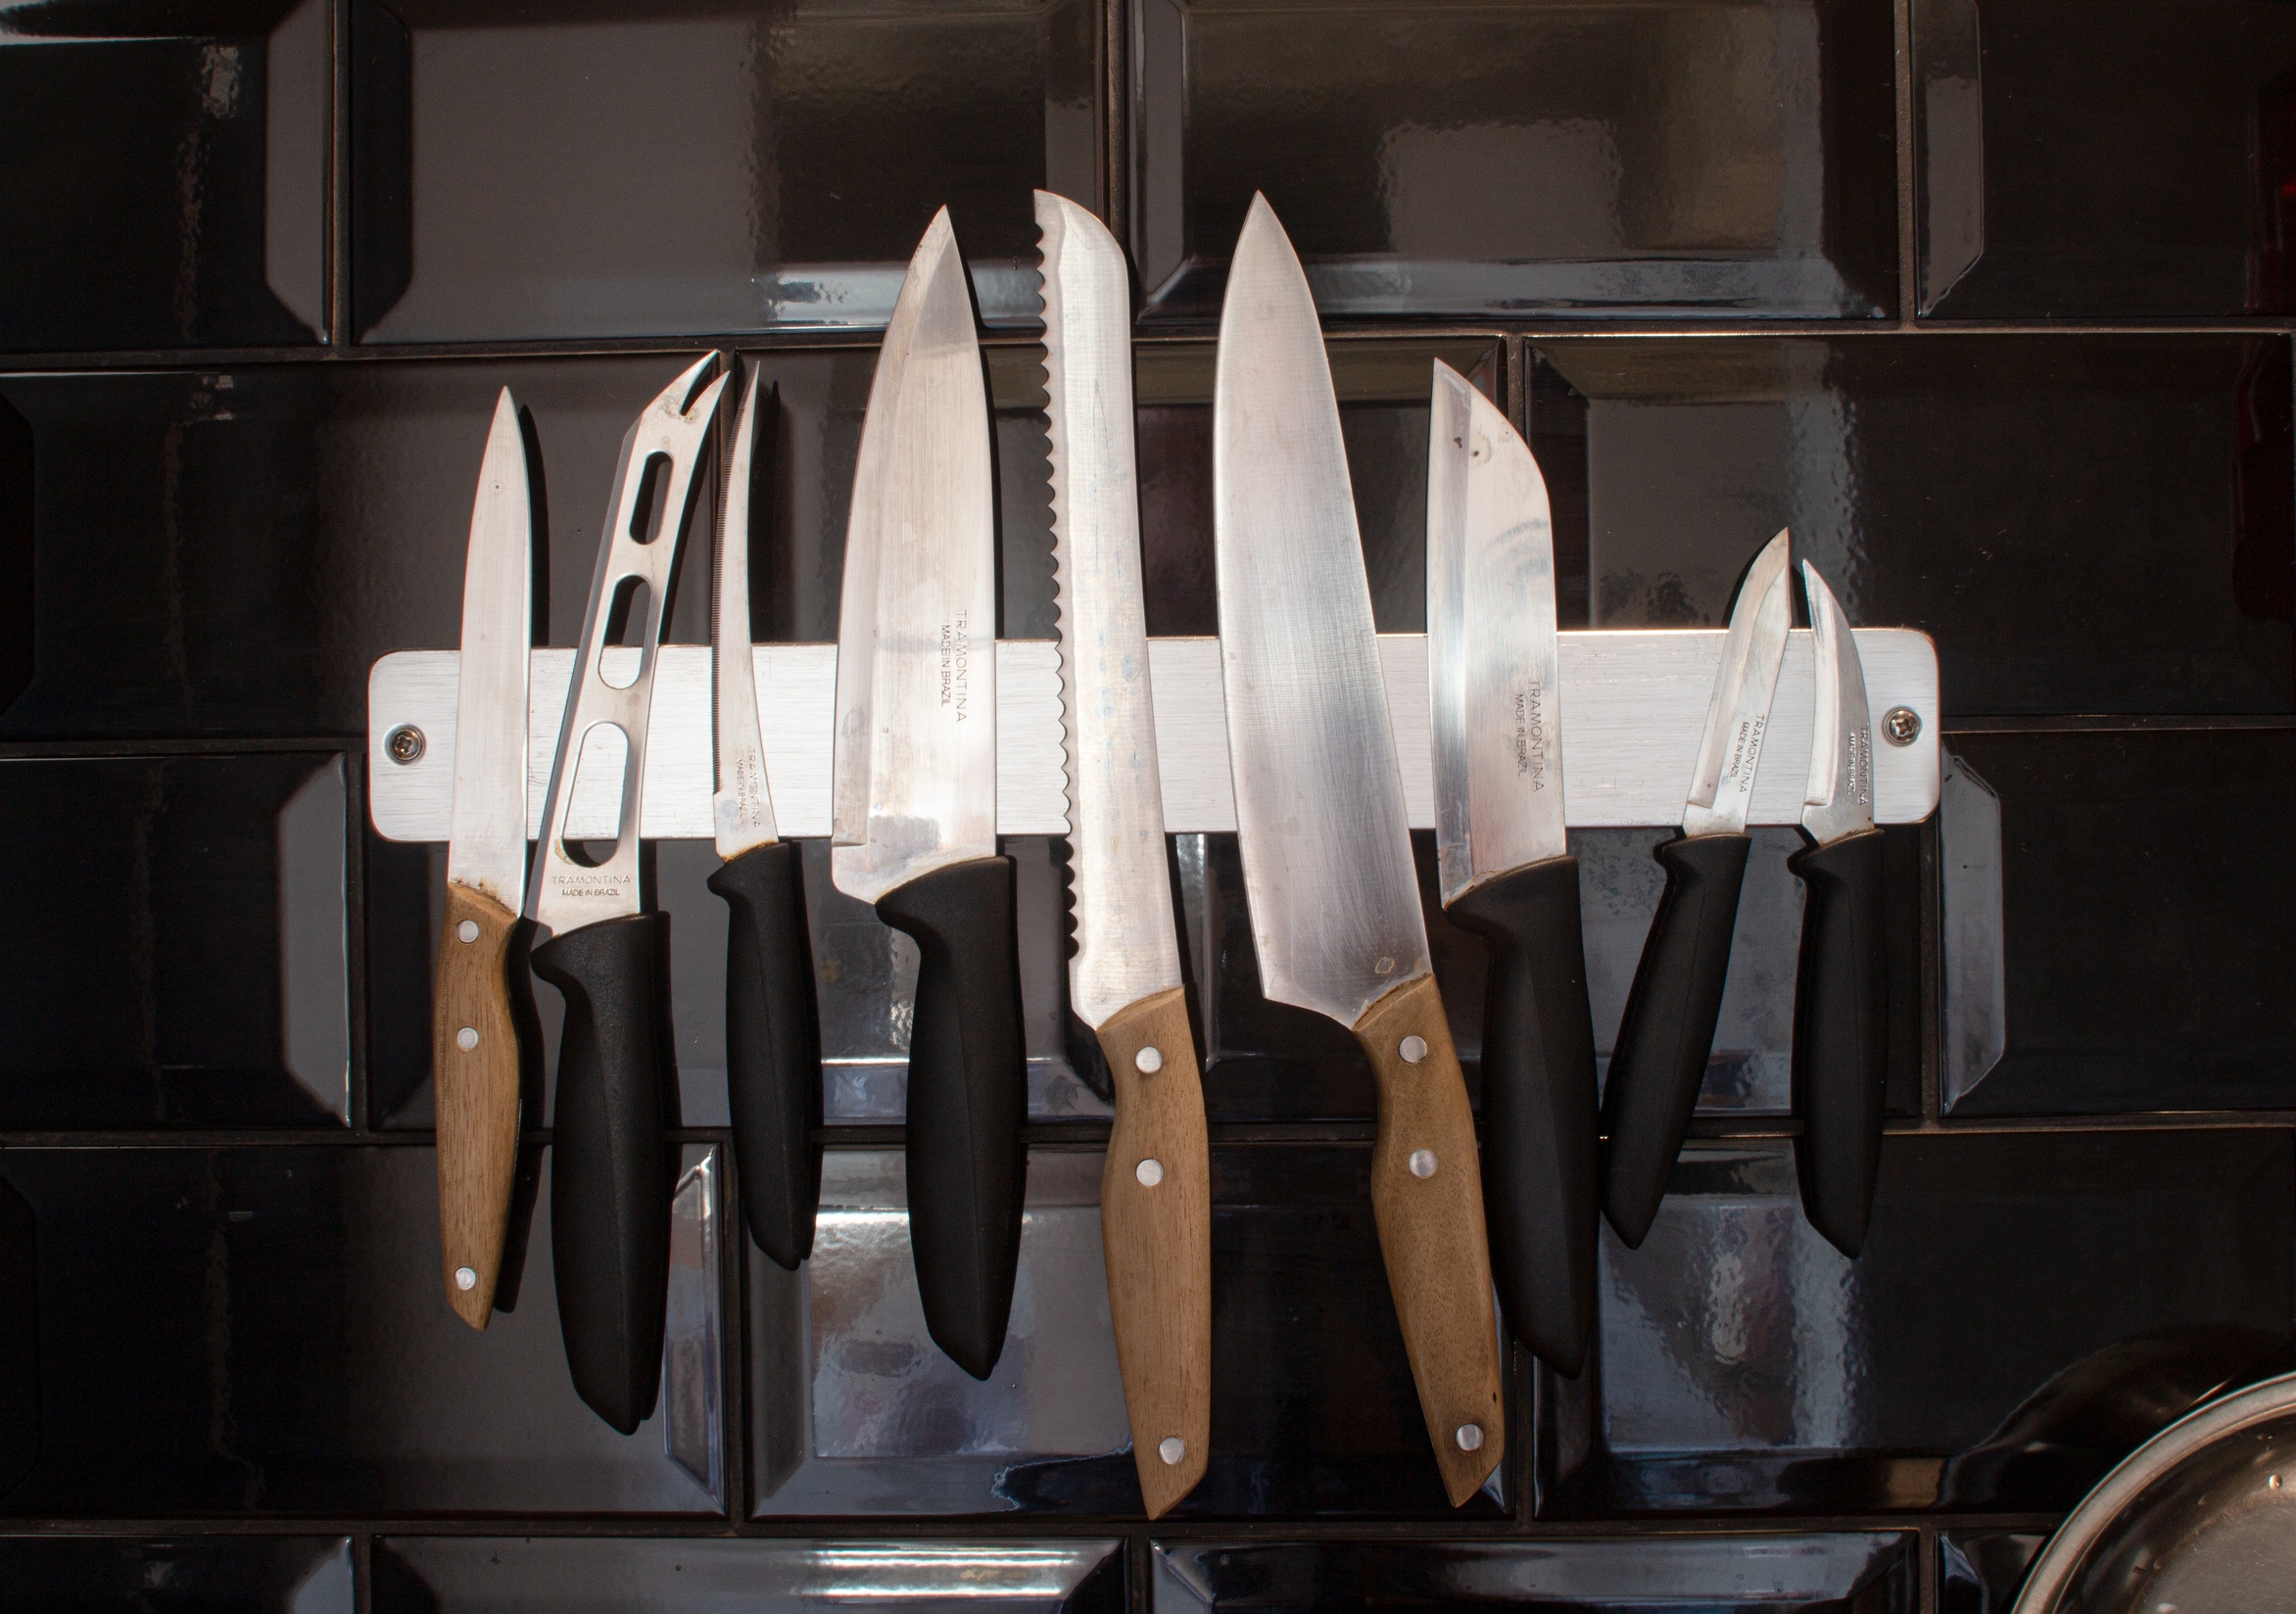 Creative Kitchen: How to Elegantly Store and Display Your Knives